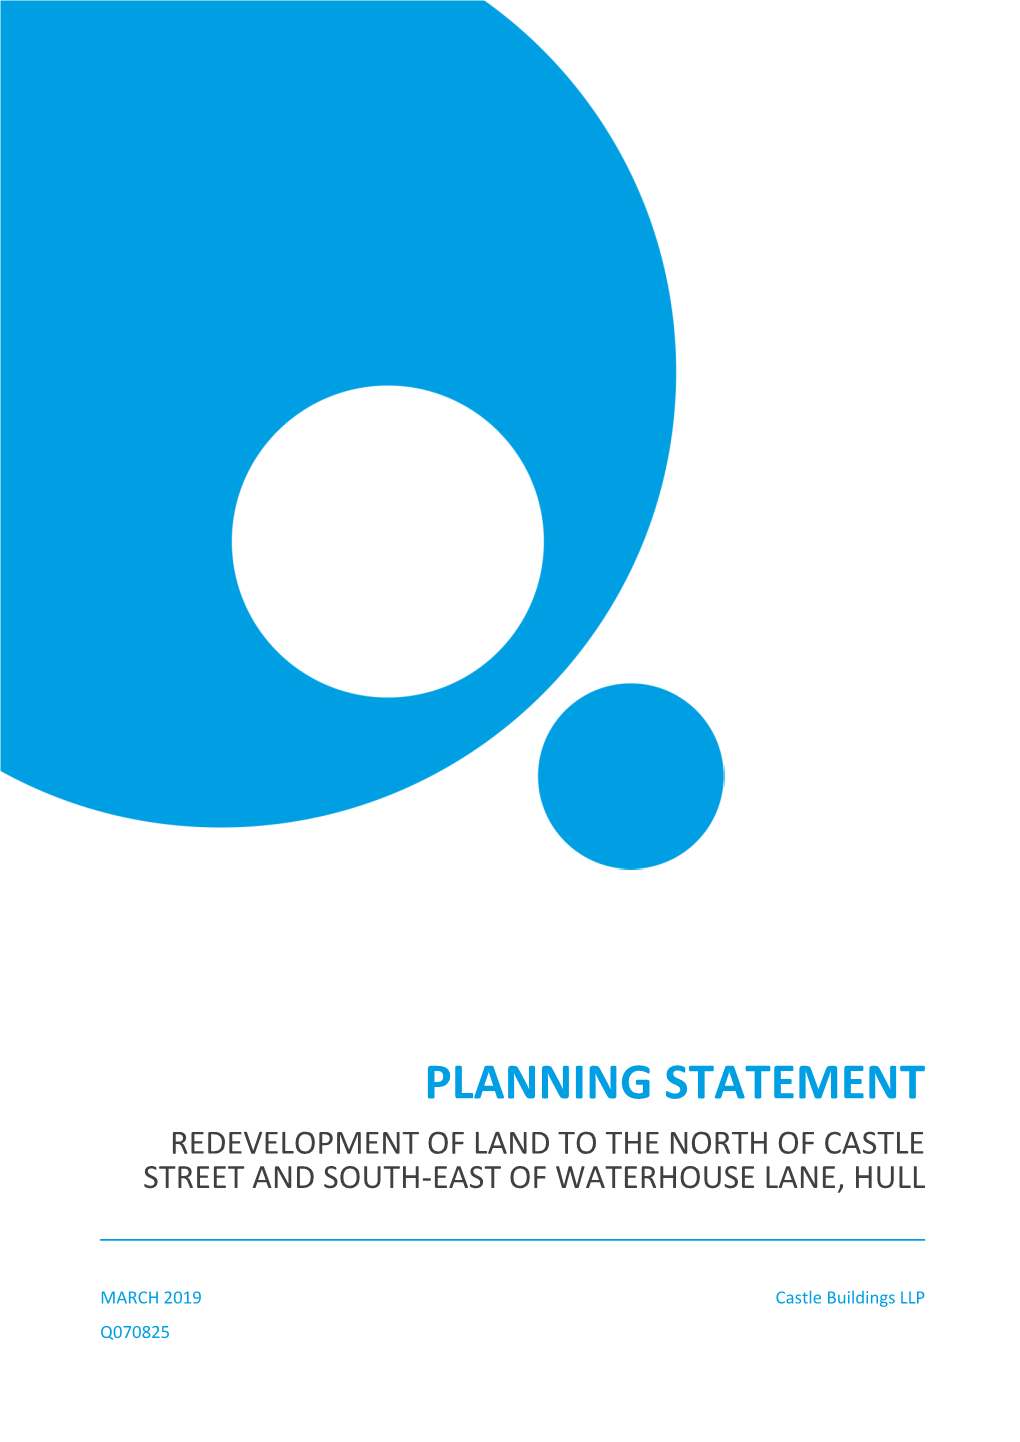 Planning Statement Redevelopment of Land to the North of Castle Street and South-East of Waterhouse Lane, Hull